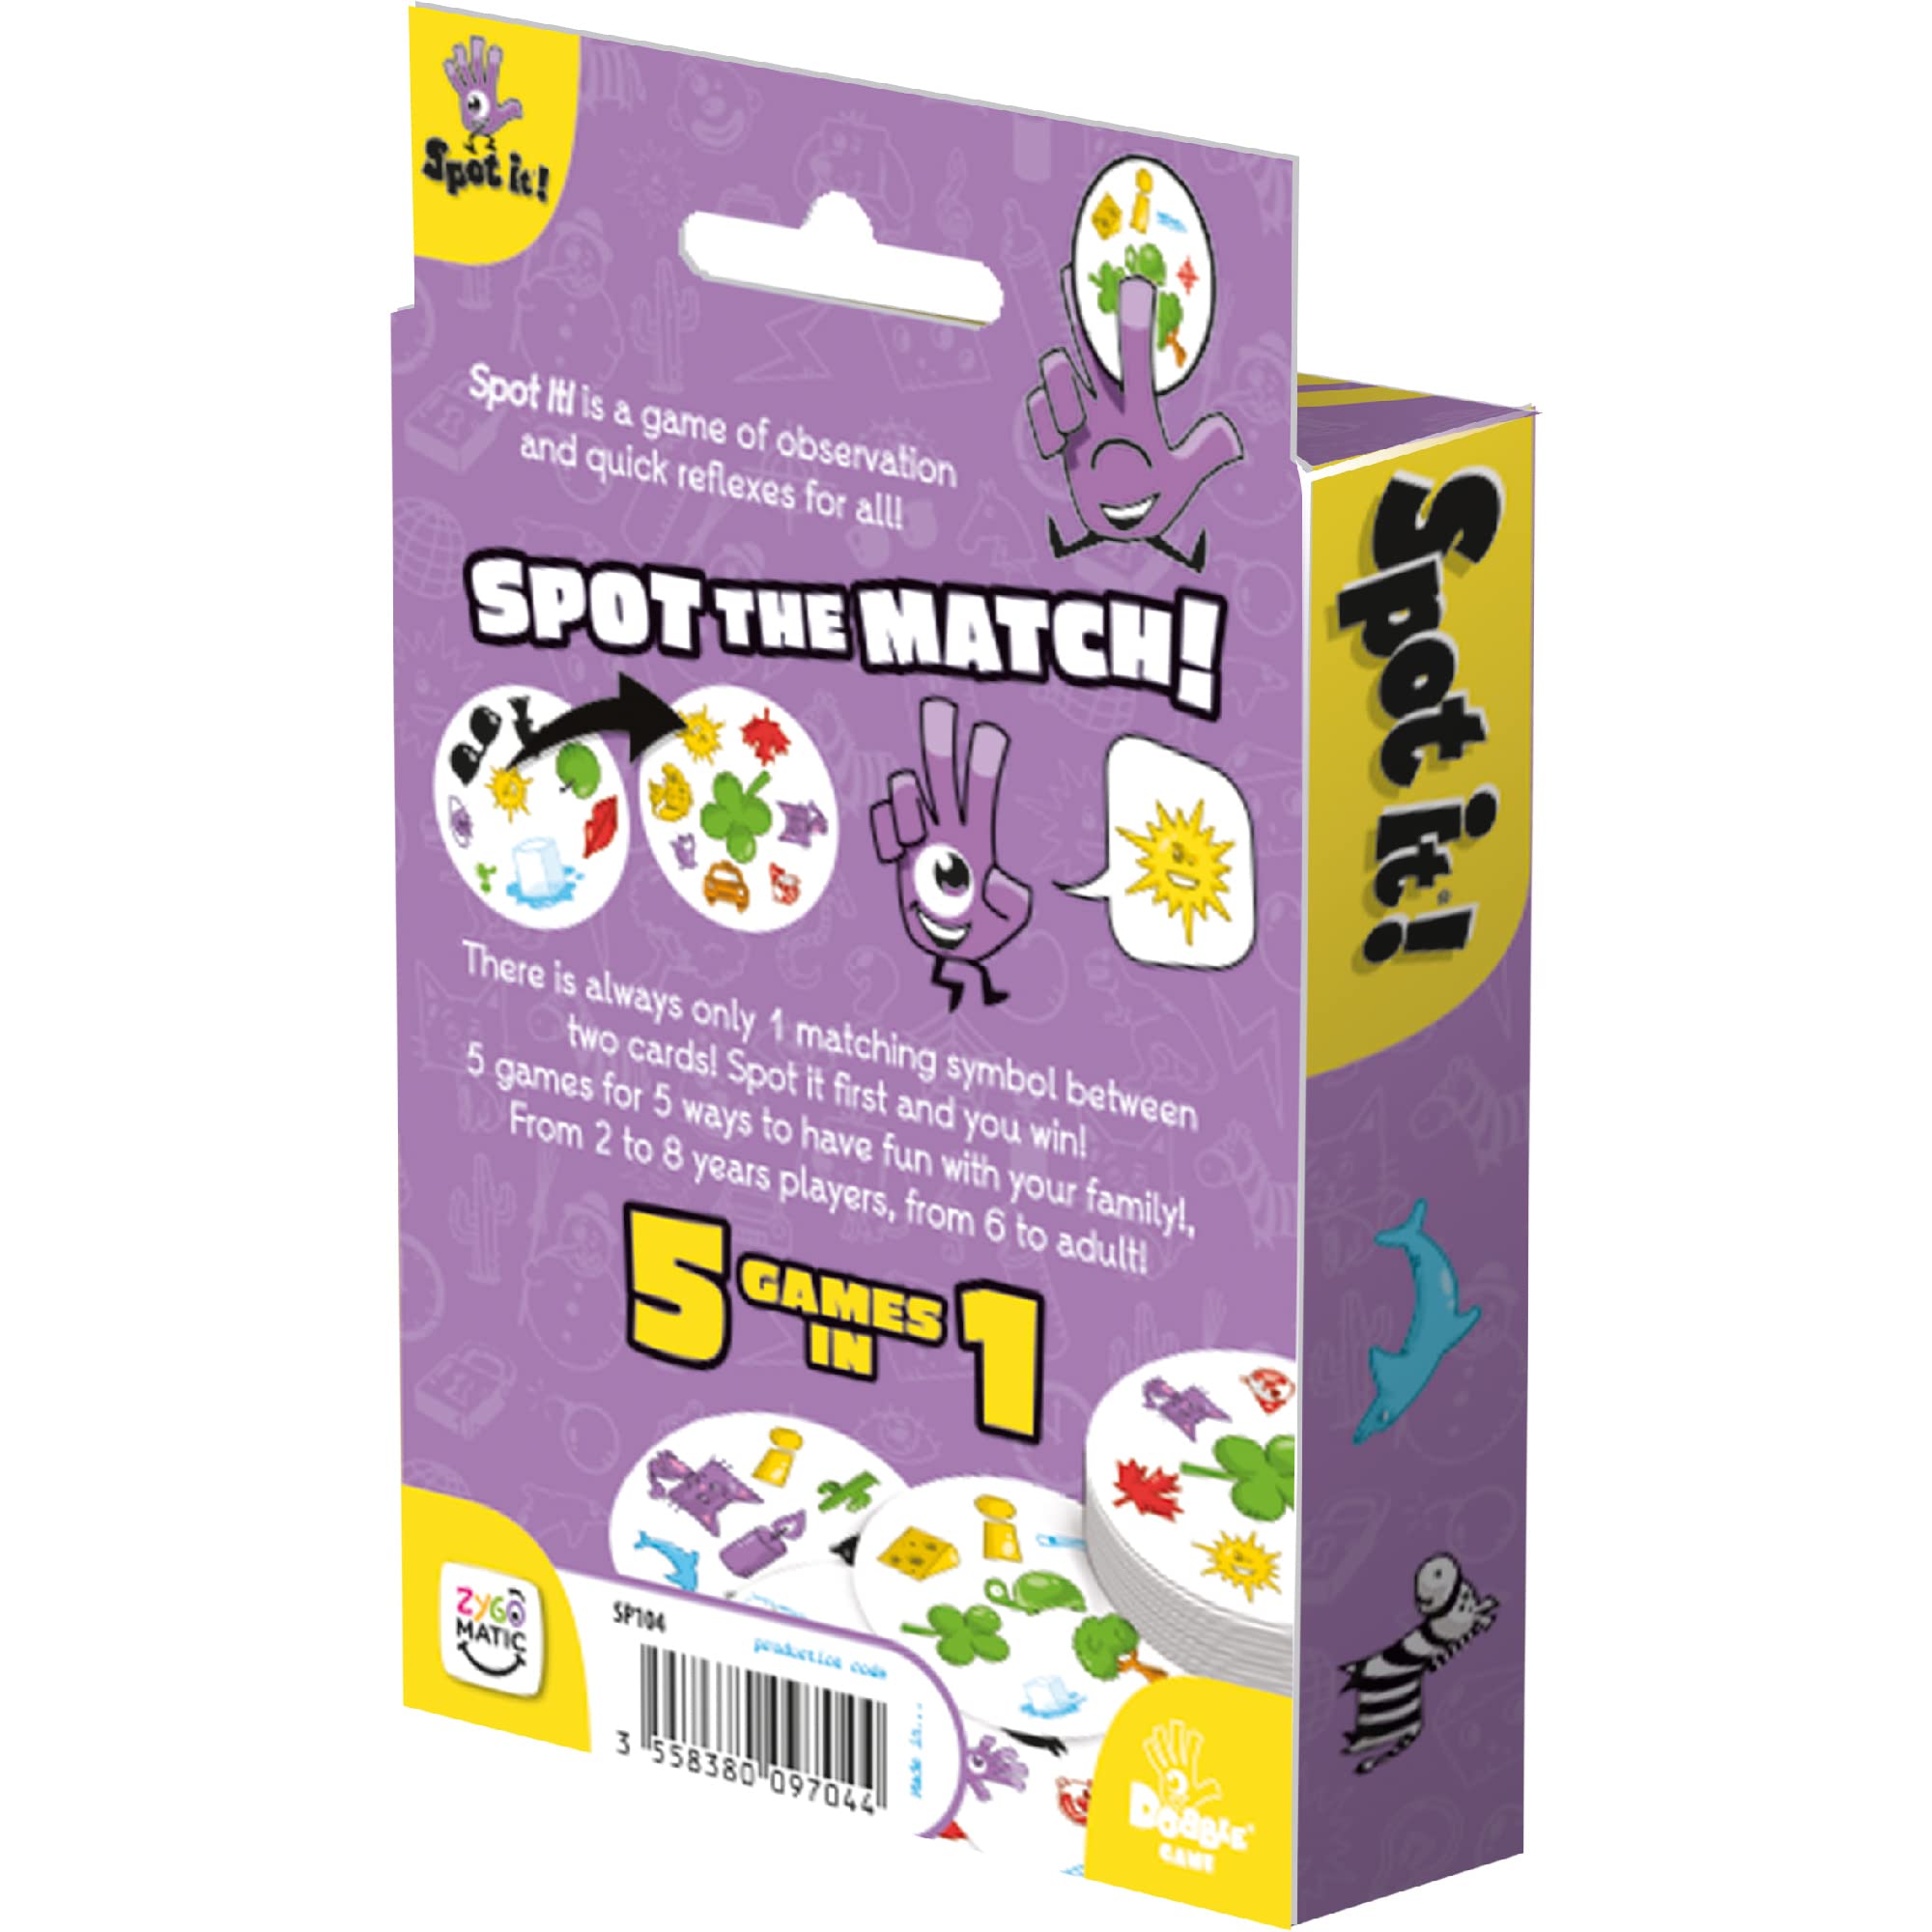 Zygomatic Spot It! Classic Card Game (Pocket Edition) | Matching Game | Fun Kids Game for Family Game Night | Travel Game | Great Kids Gift | Ages 6+ | 2-8 Players | Avg. Playtime 15 Mins | Made